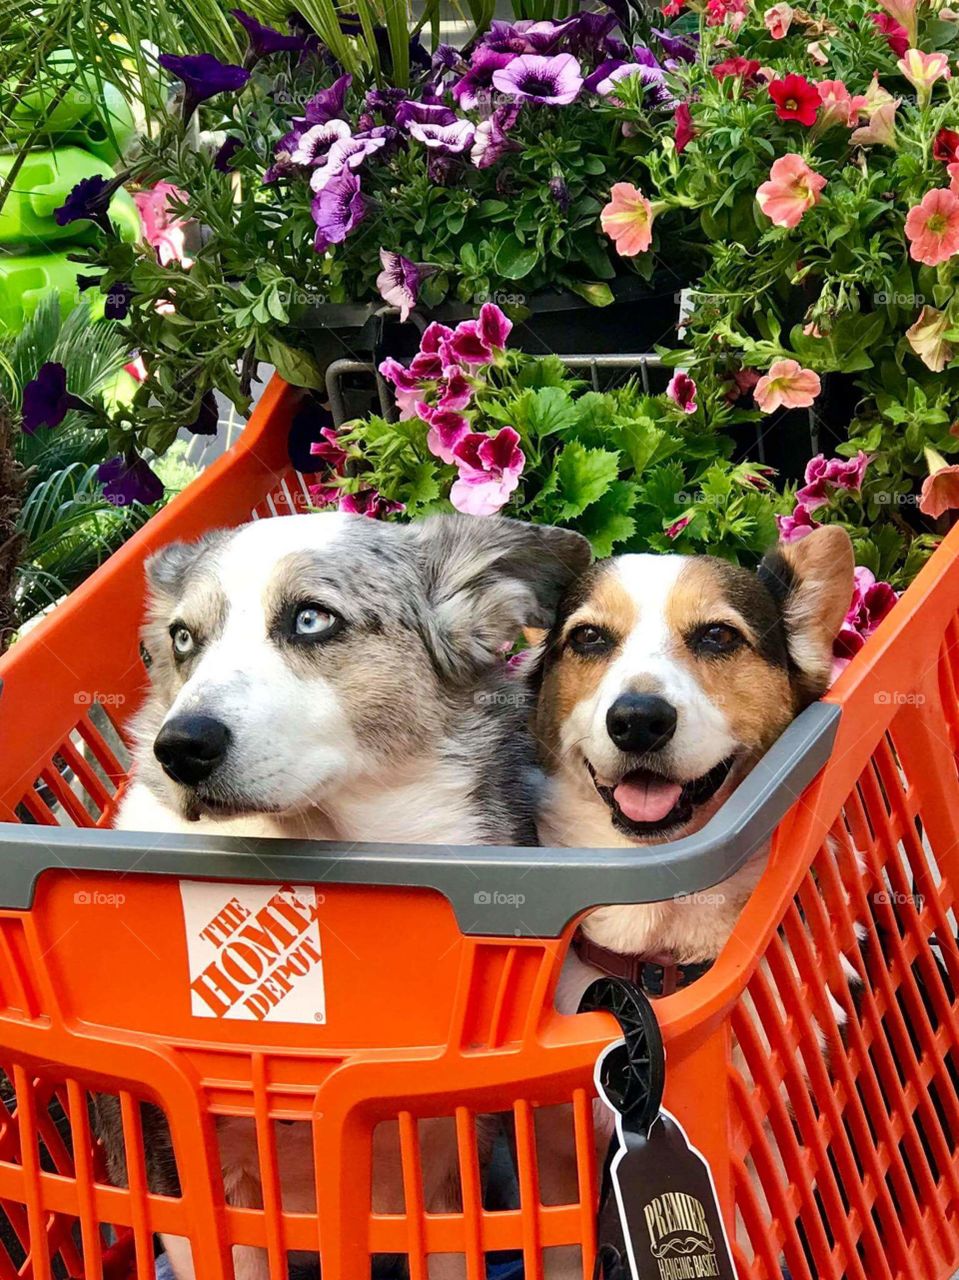 My friend's dogs at Home Depot.
Friend getting more plants to plant for Earth Day.  Every year friend goes to buy a new plant or tree to grow.  Buys each Earth Day.